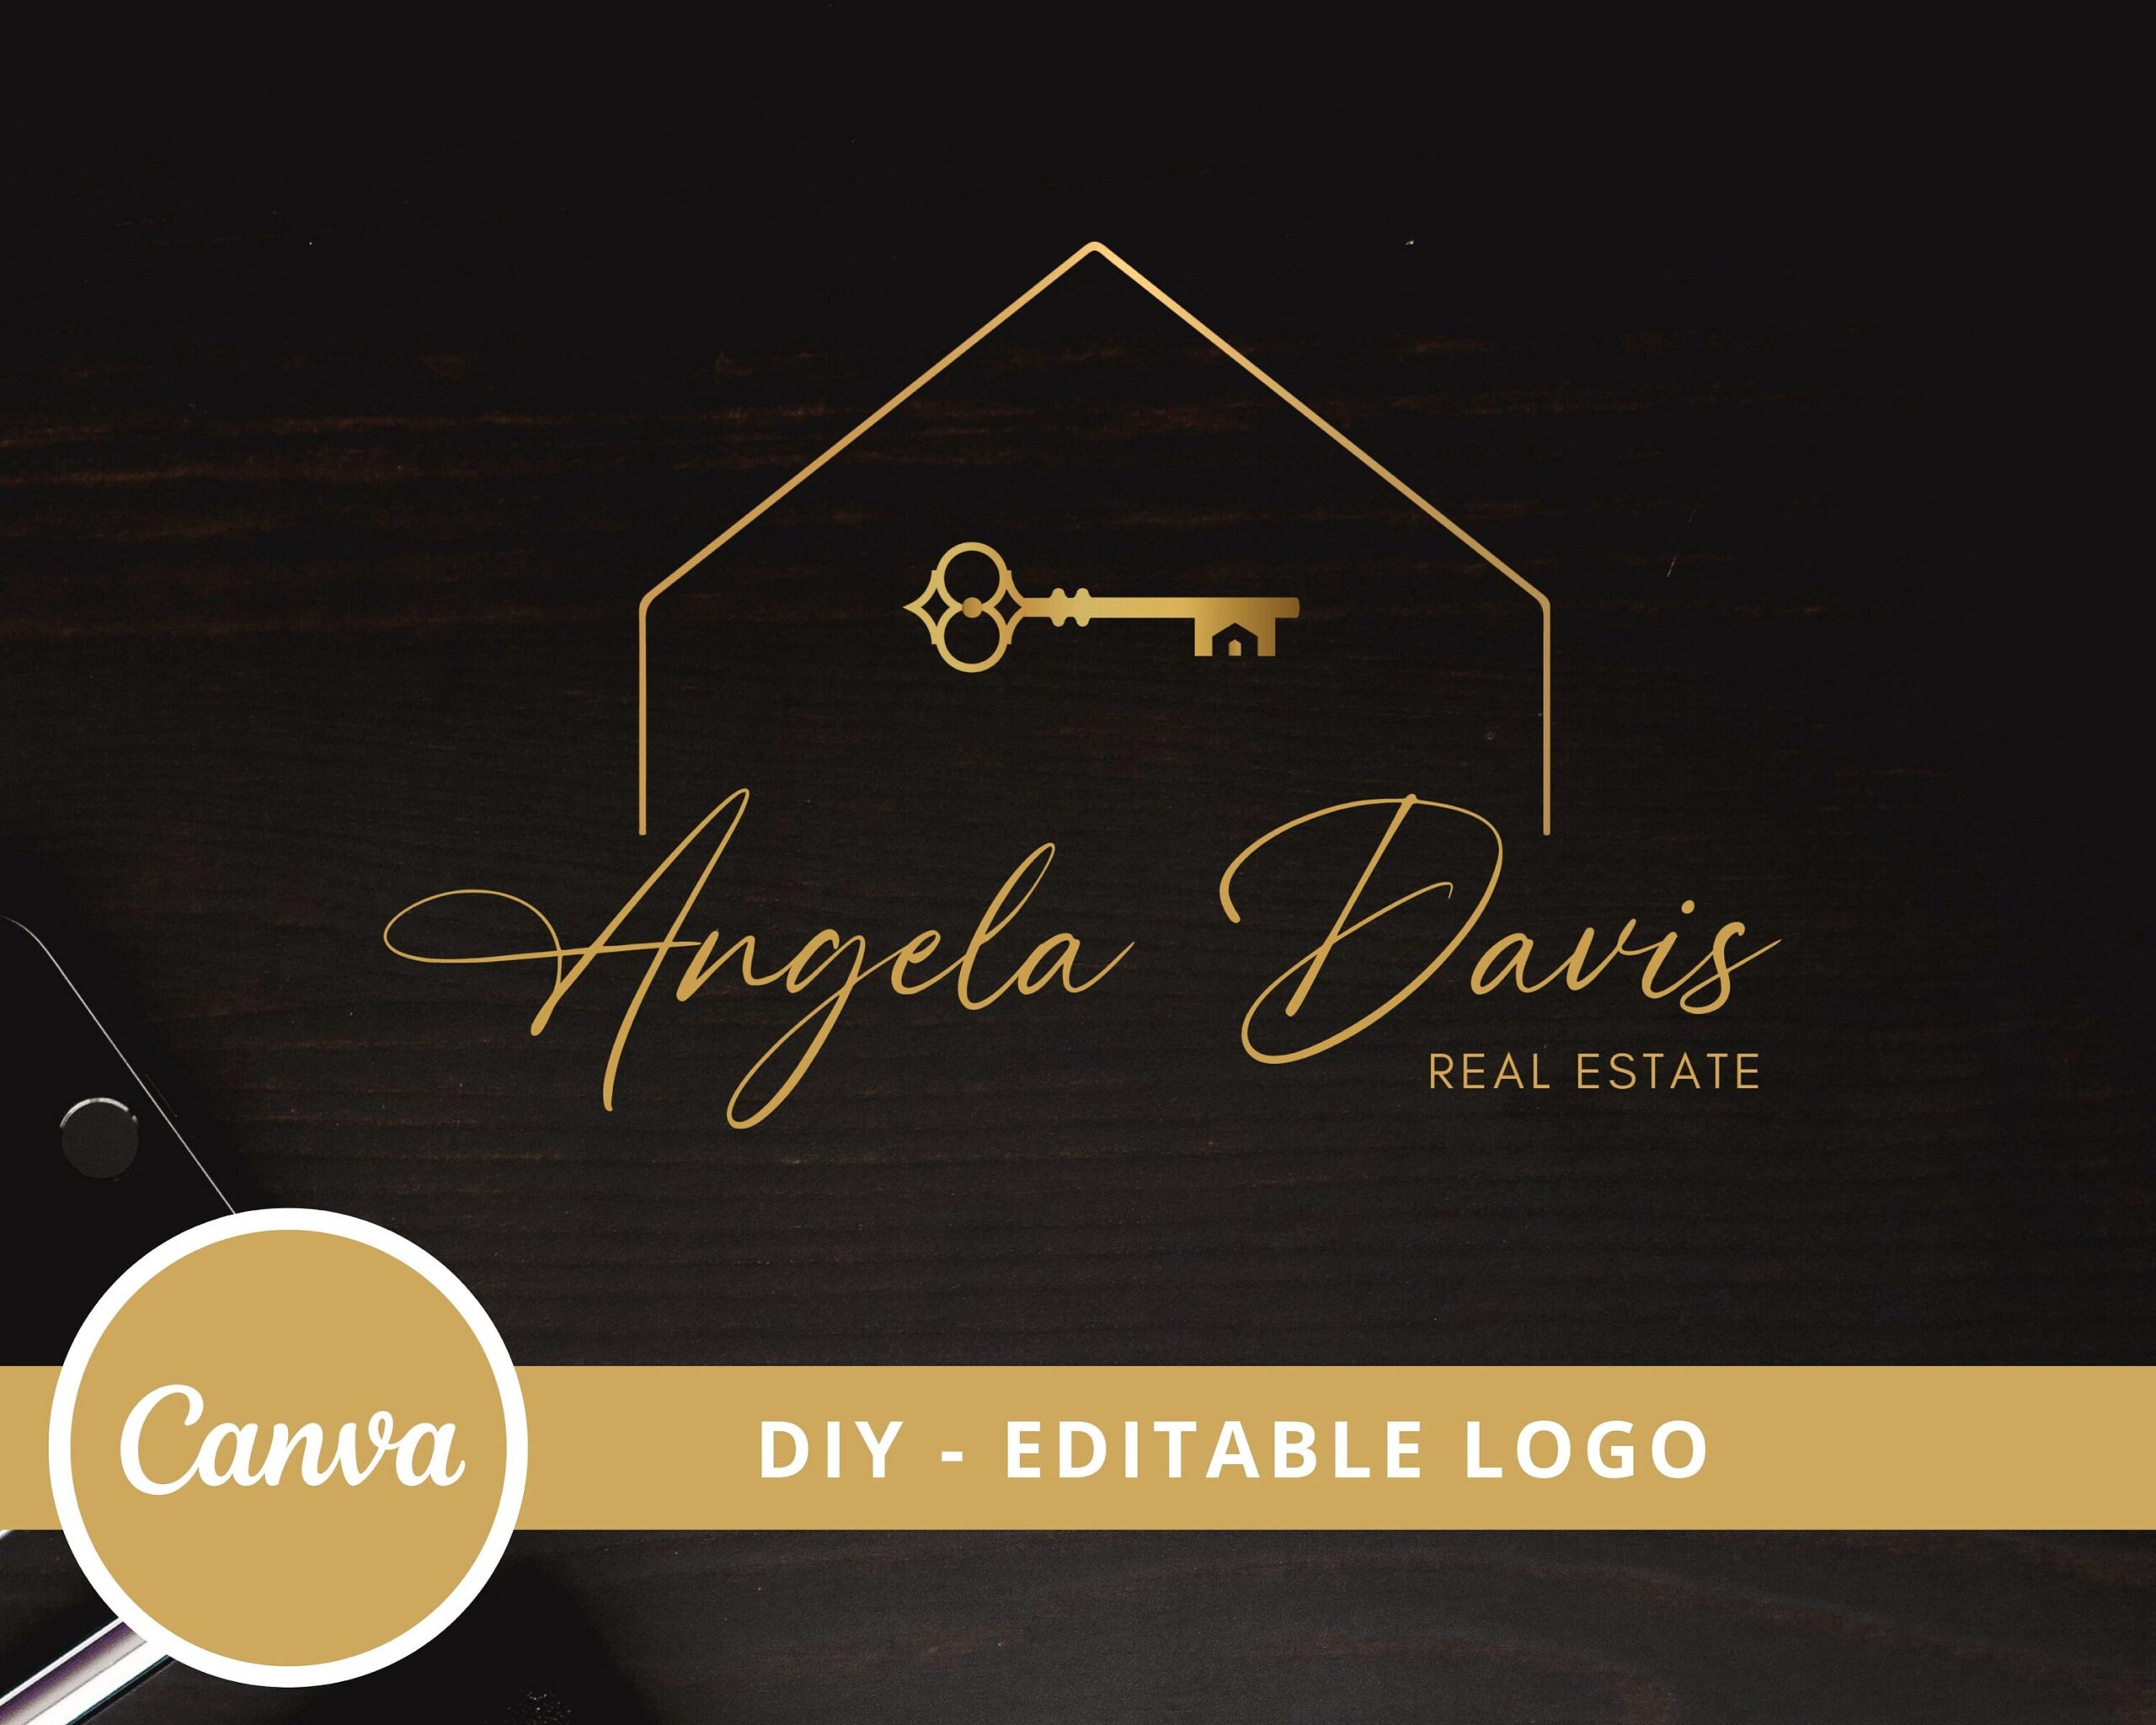 DIY Editable Logo Design for Real Estate Agents, Canva Logo Template, Instant Access, Easy to use,  Edit & Download, Real Estate Logo Design